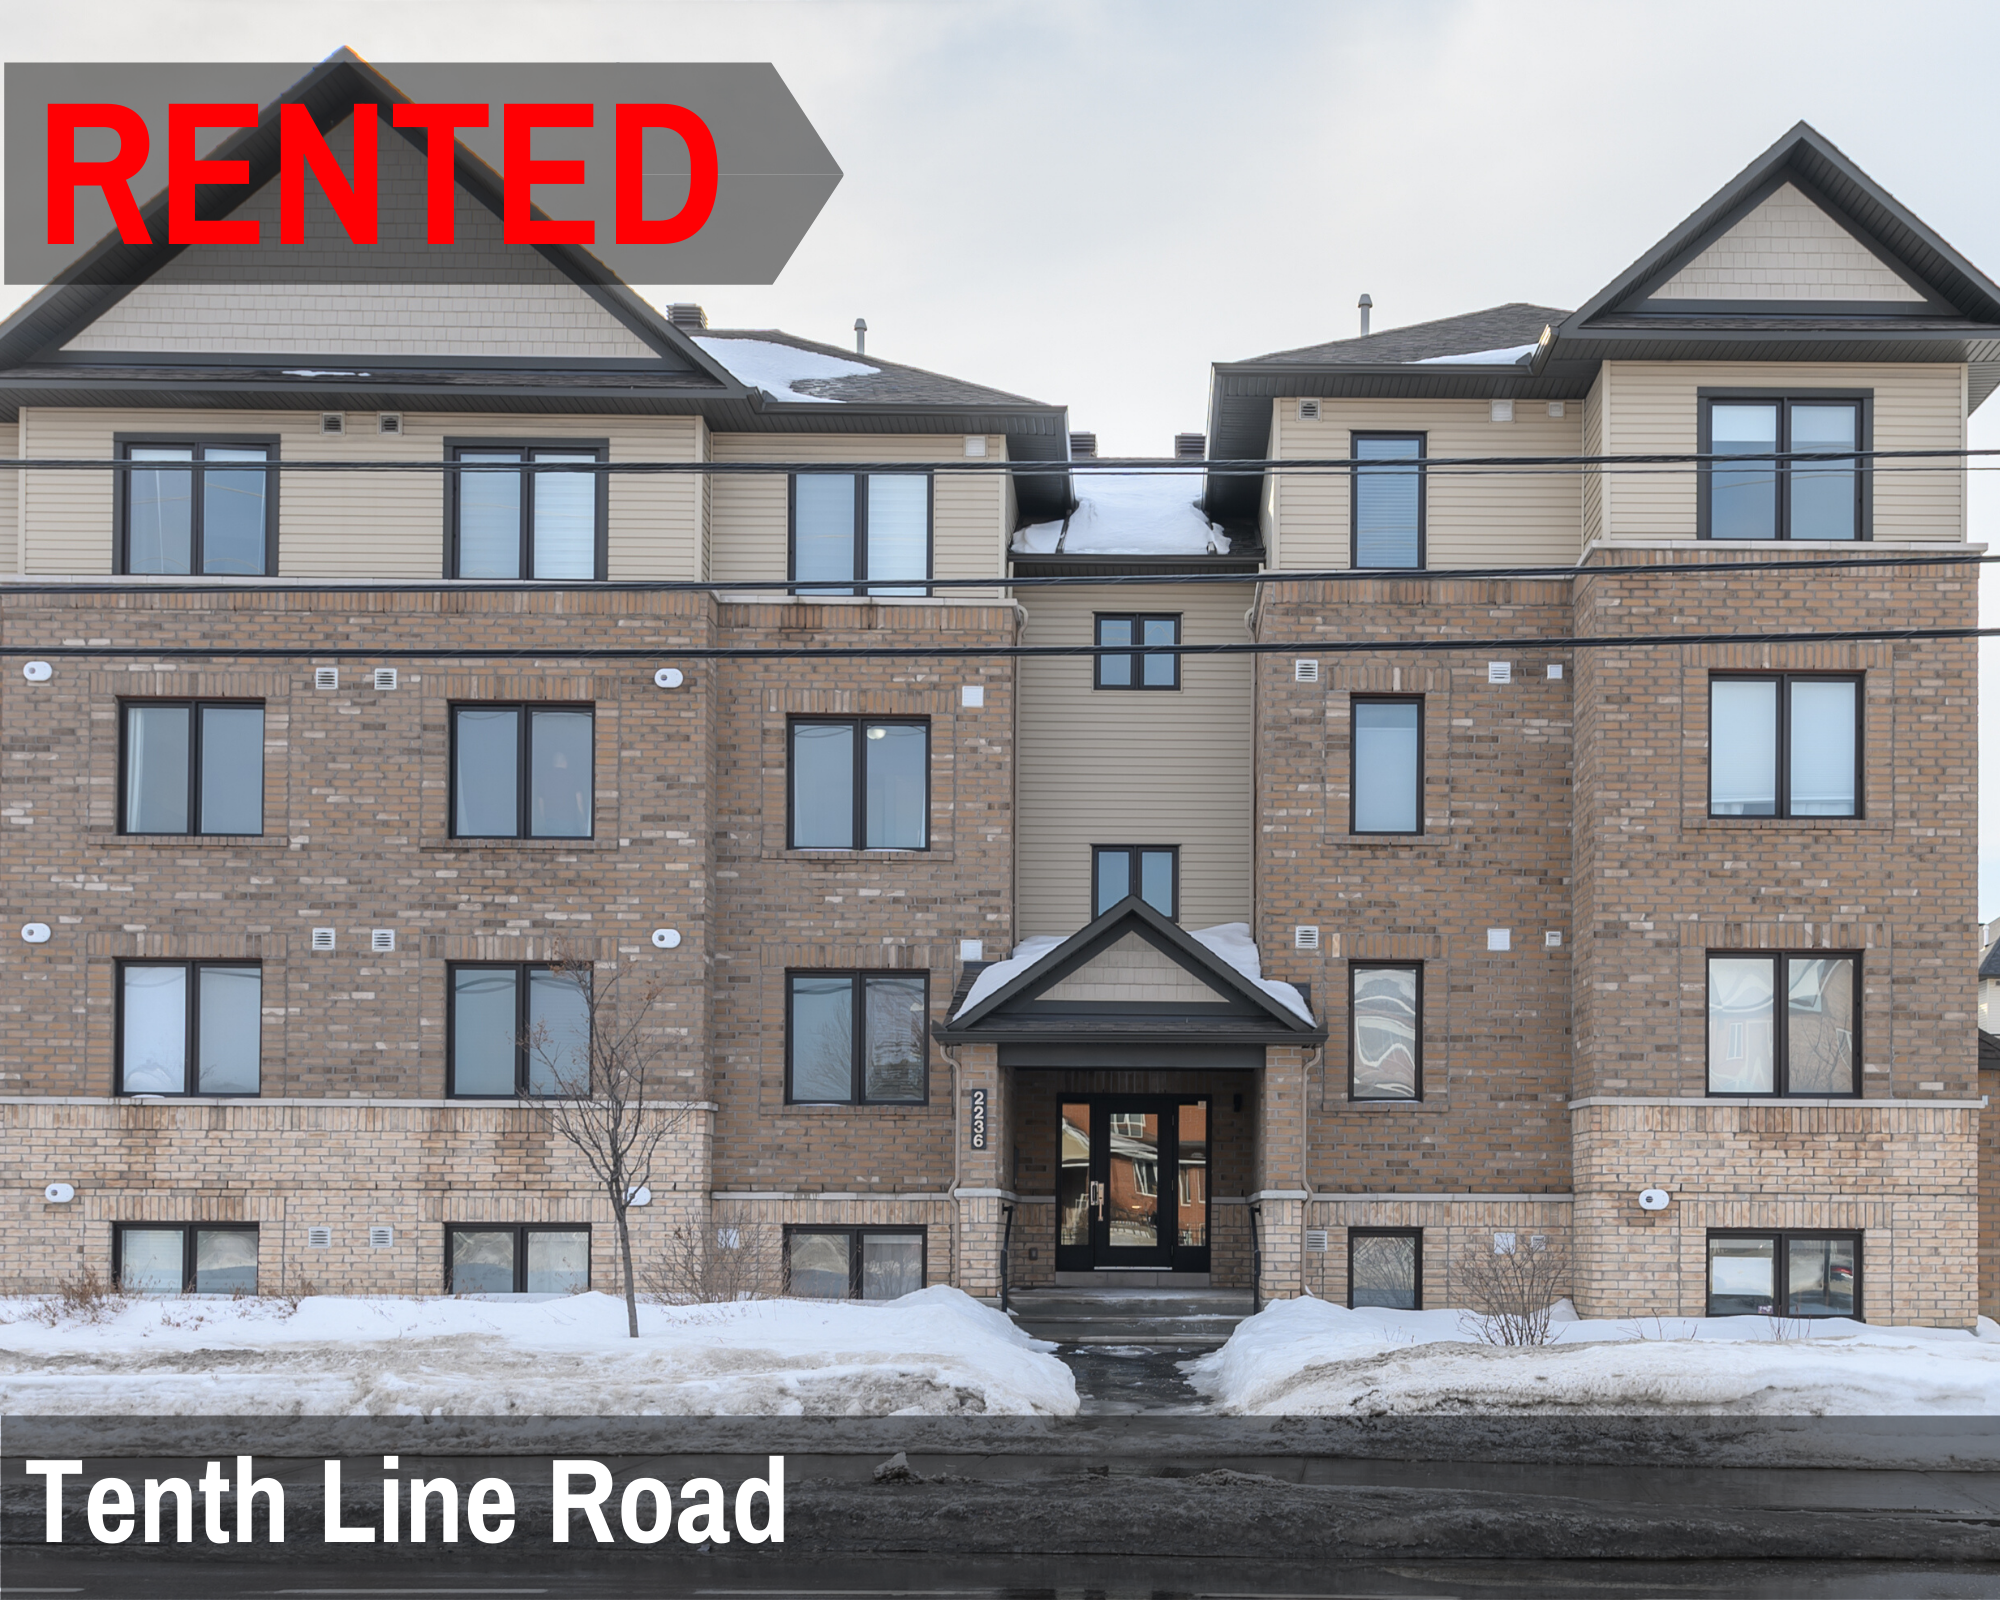 2236 Tenth Line Rd. #5 - Rented.png